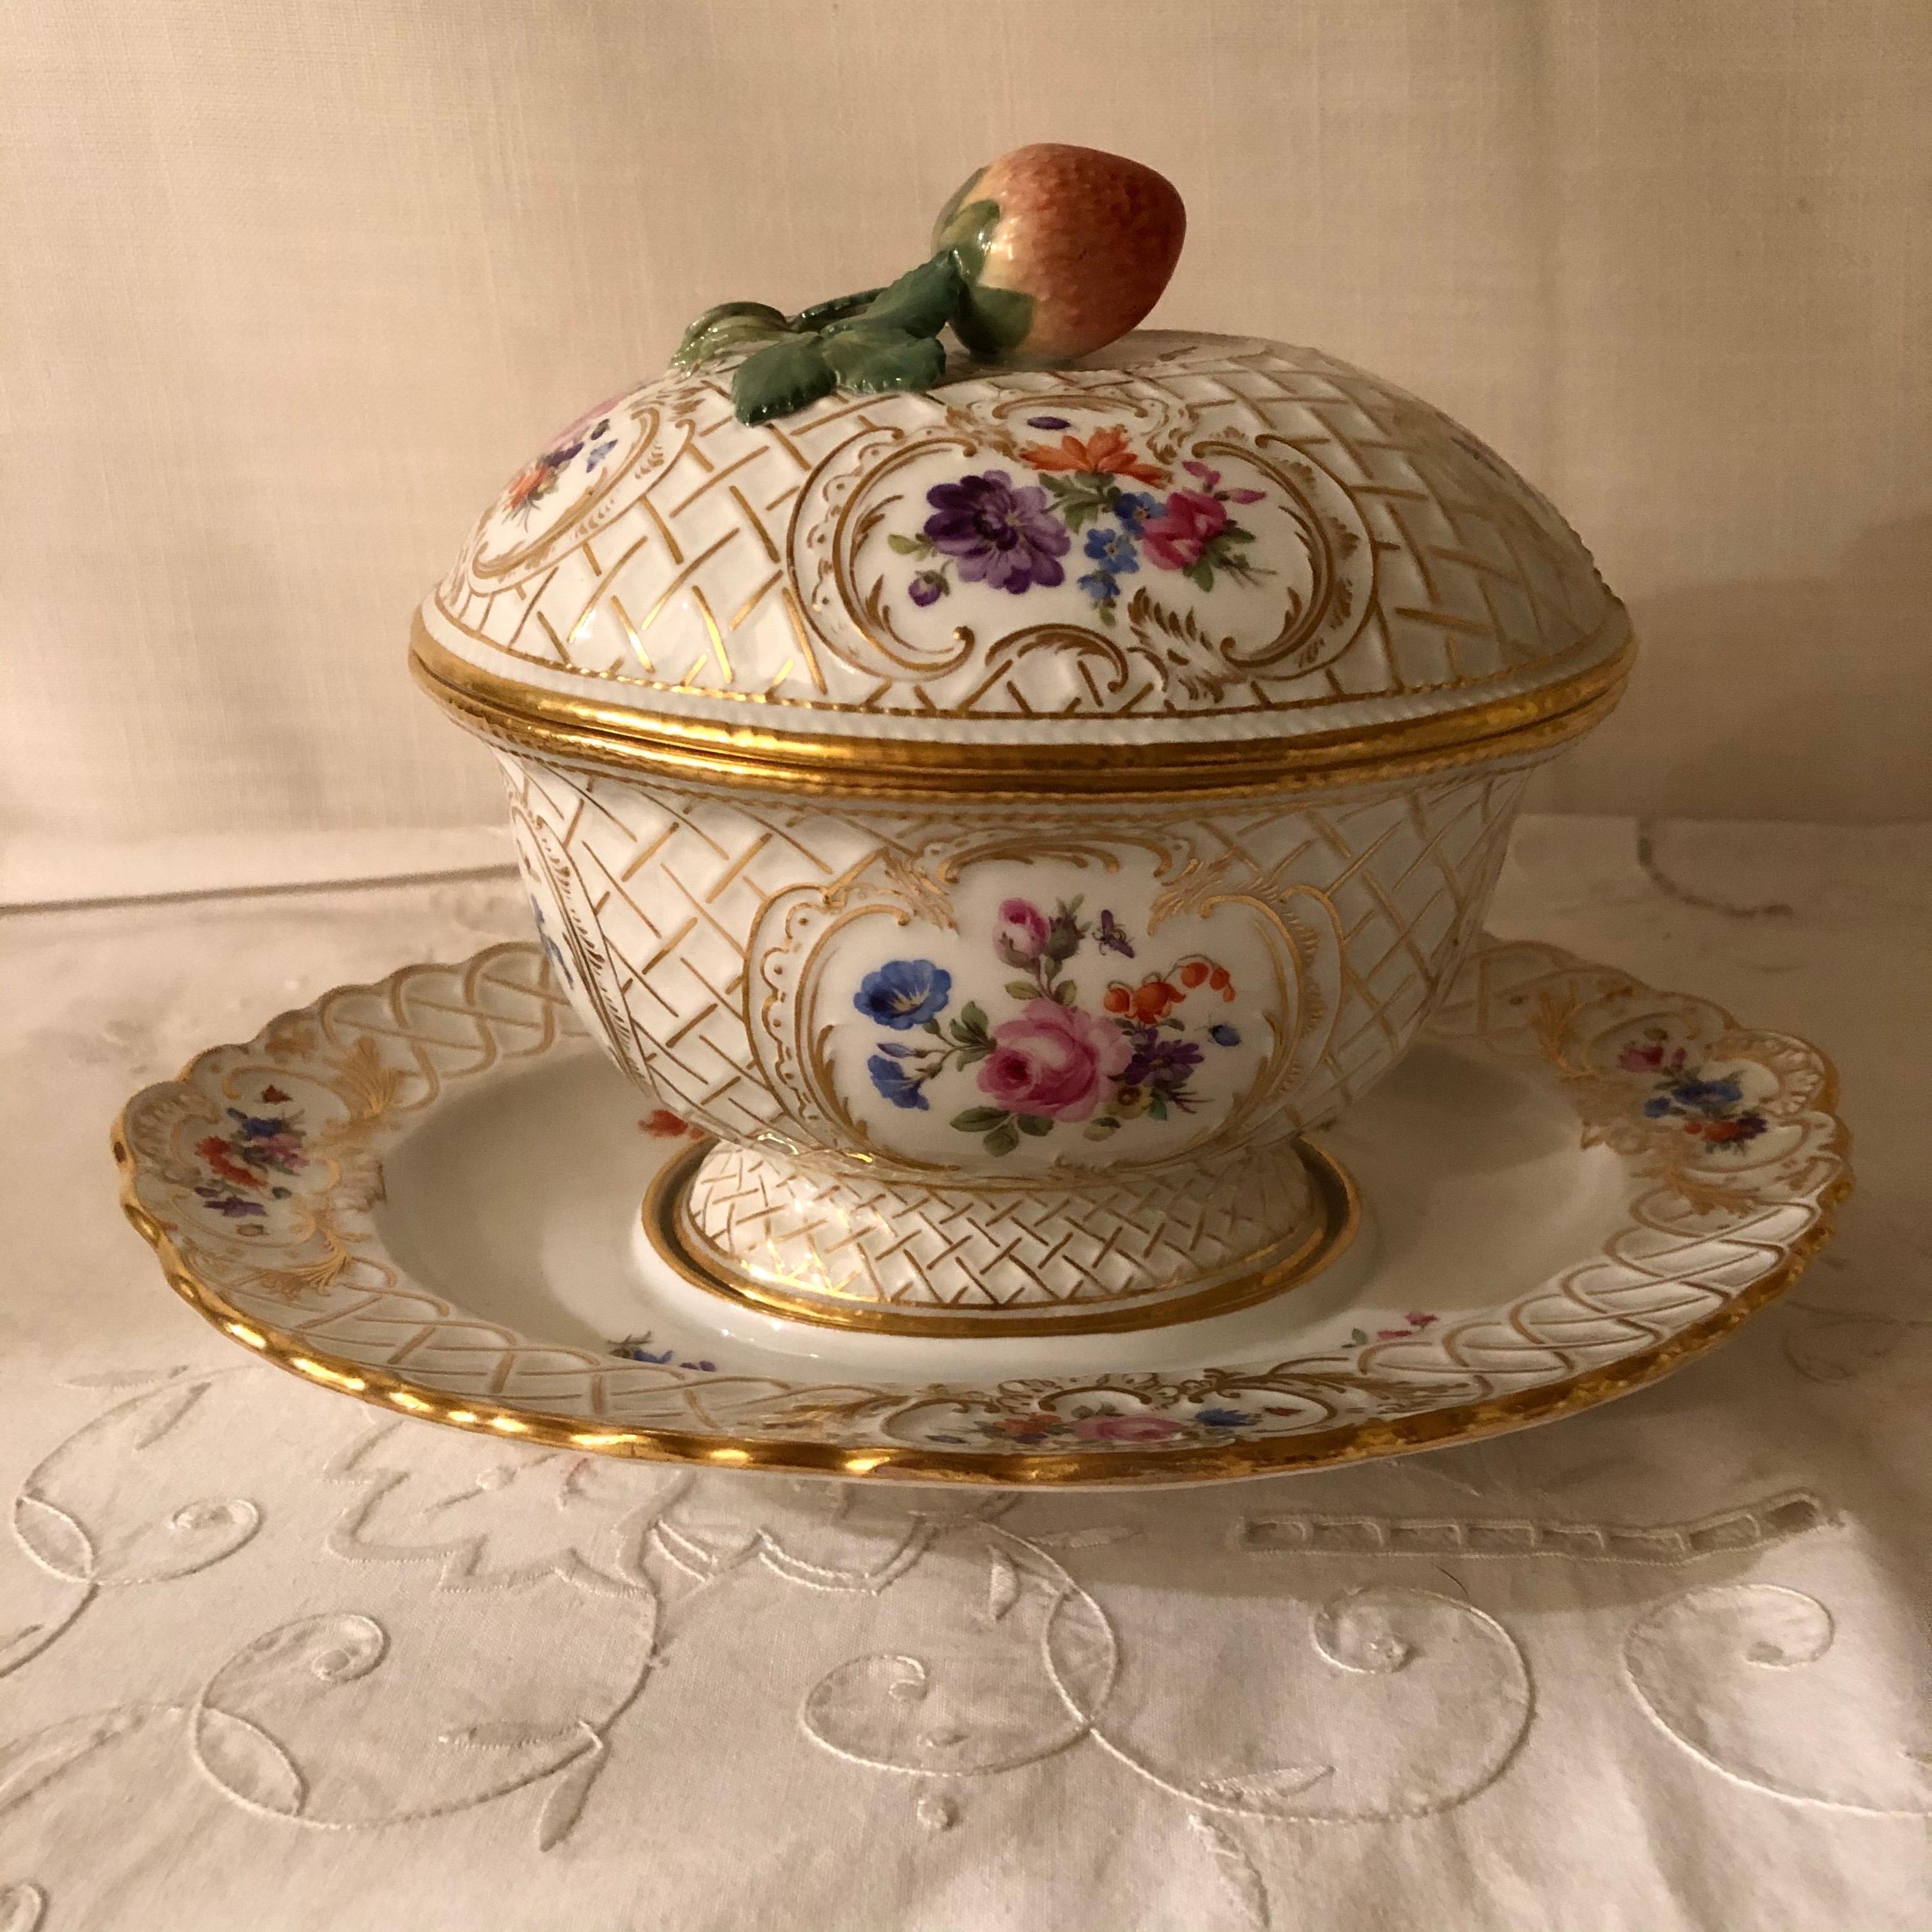 Rococo Rare Meissen Gravy or Saucier with Attached Underplate and Cover with Strawberry For Sale